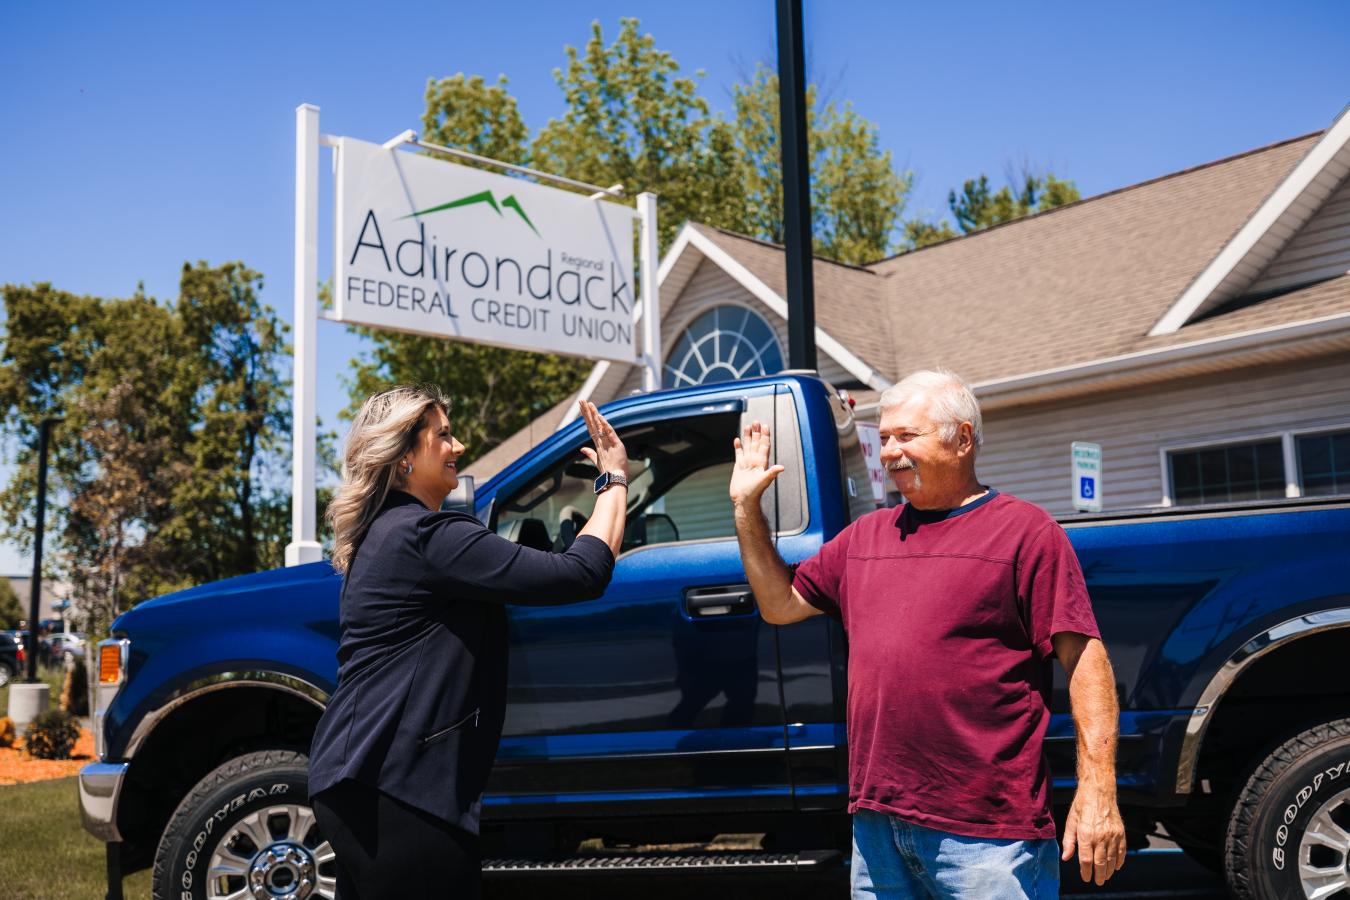 Plattsburgh credit union member high fiving an employee in front of their new truck and the Adirondack Regional Federal Credit Union sign